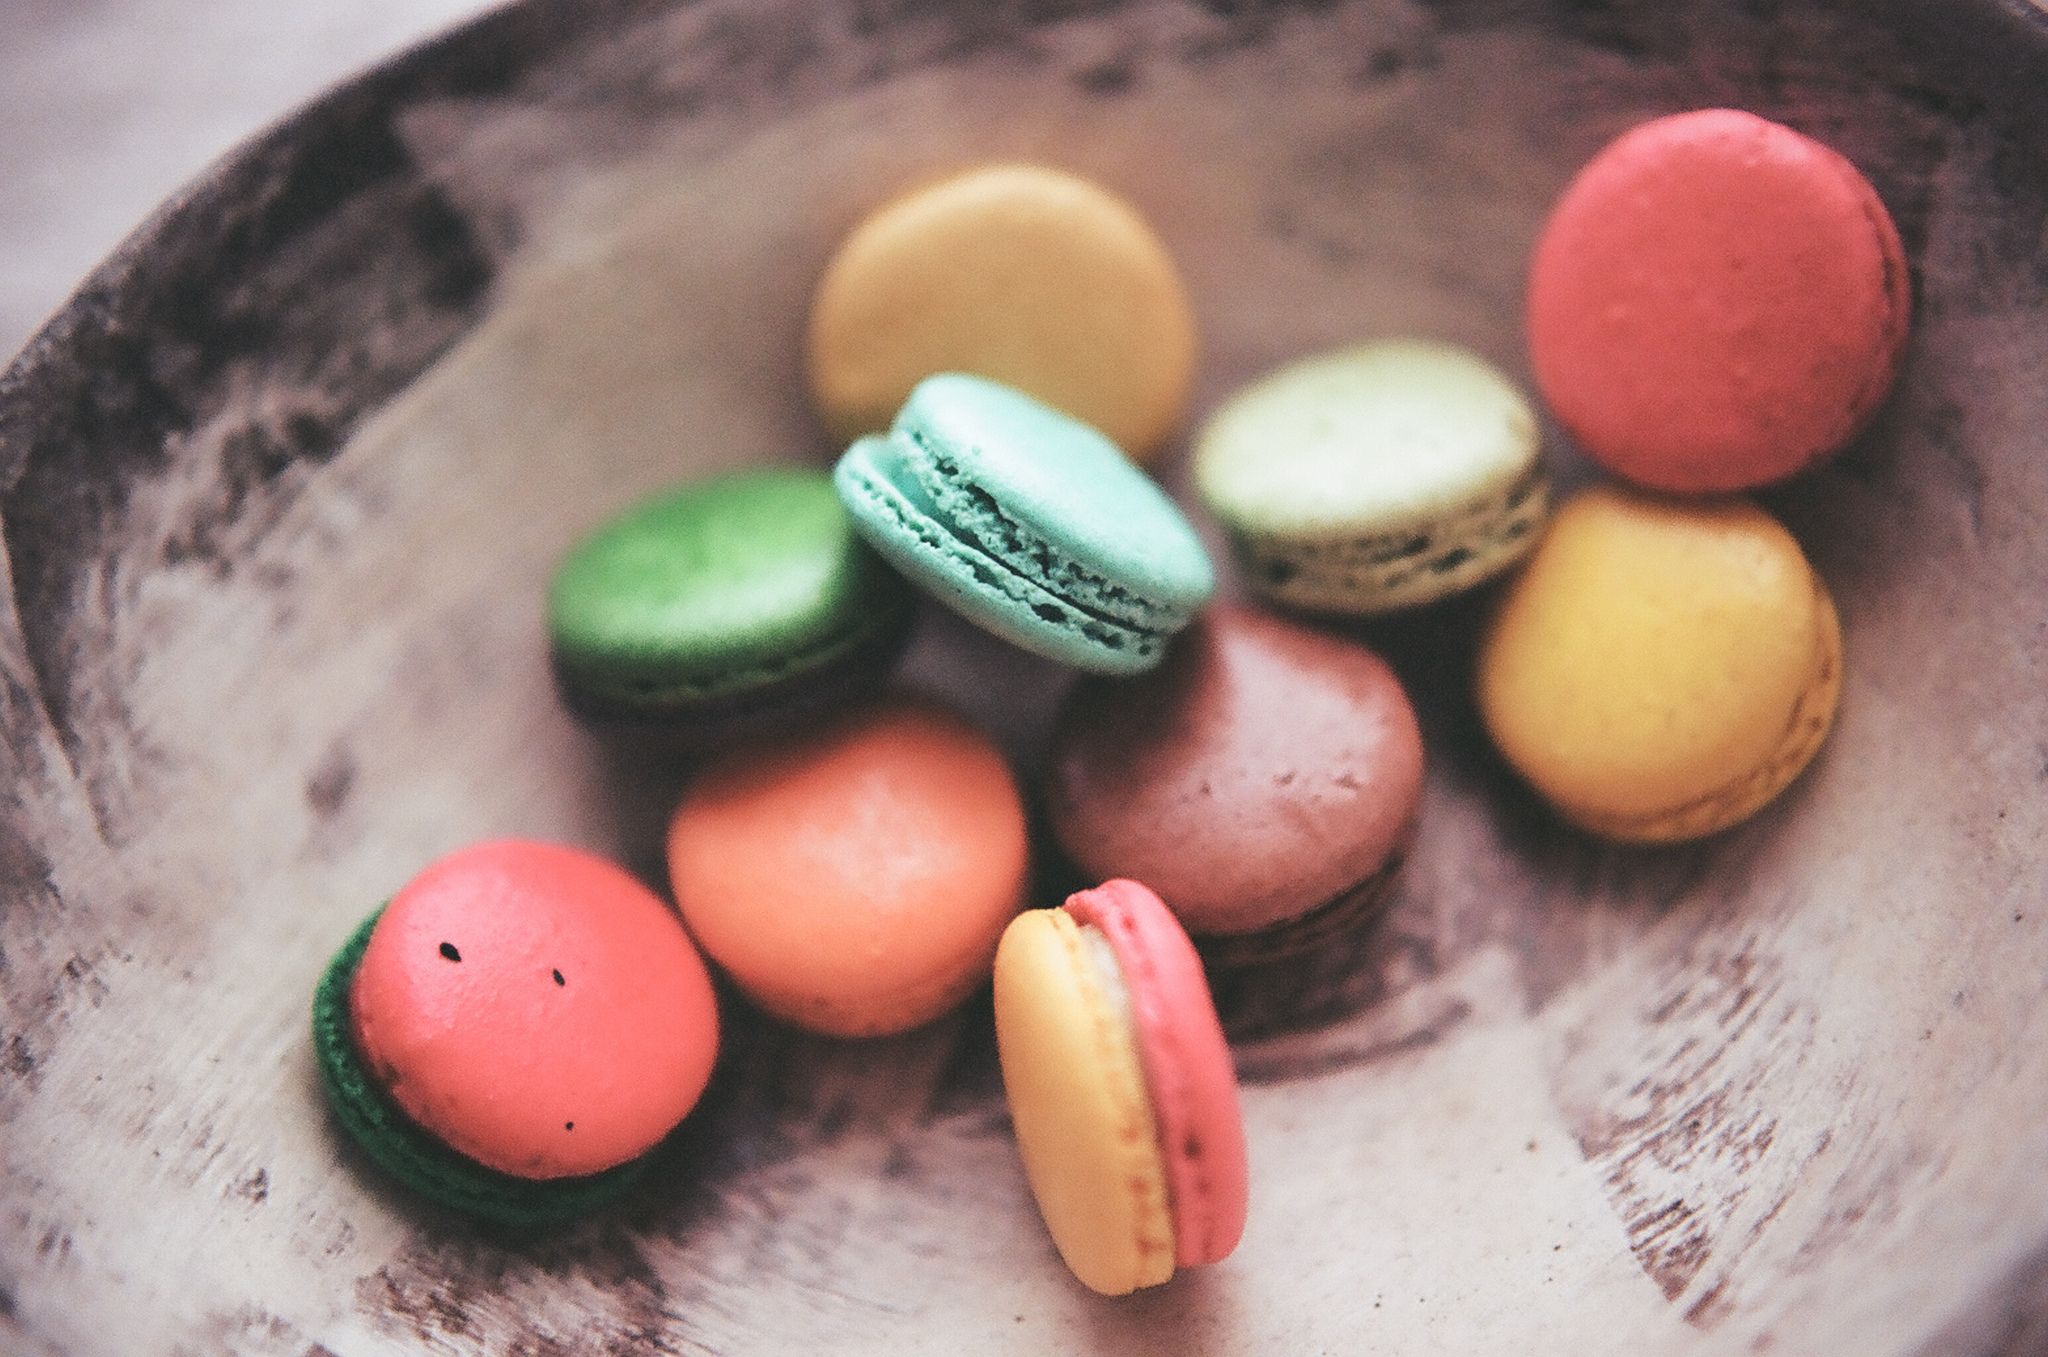 A bowl of colorful macarons on a wooden table. - Macarons